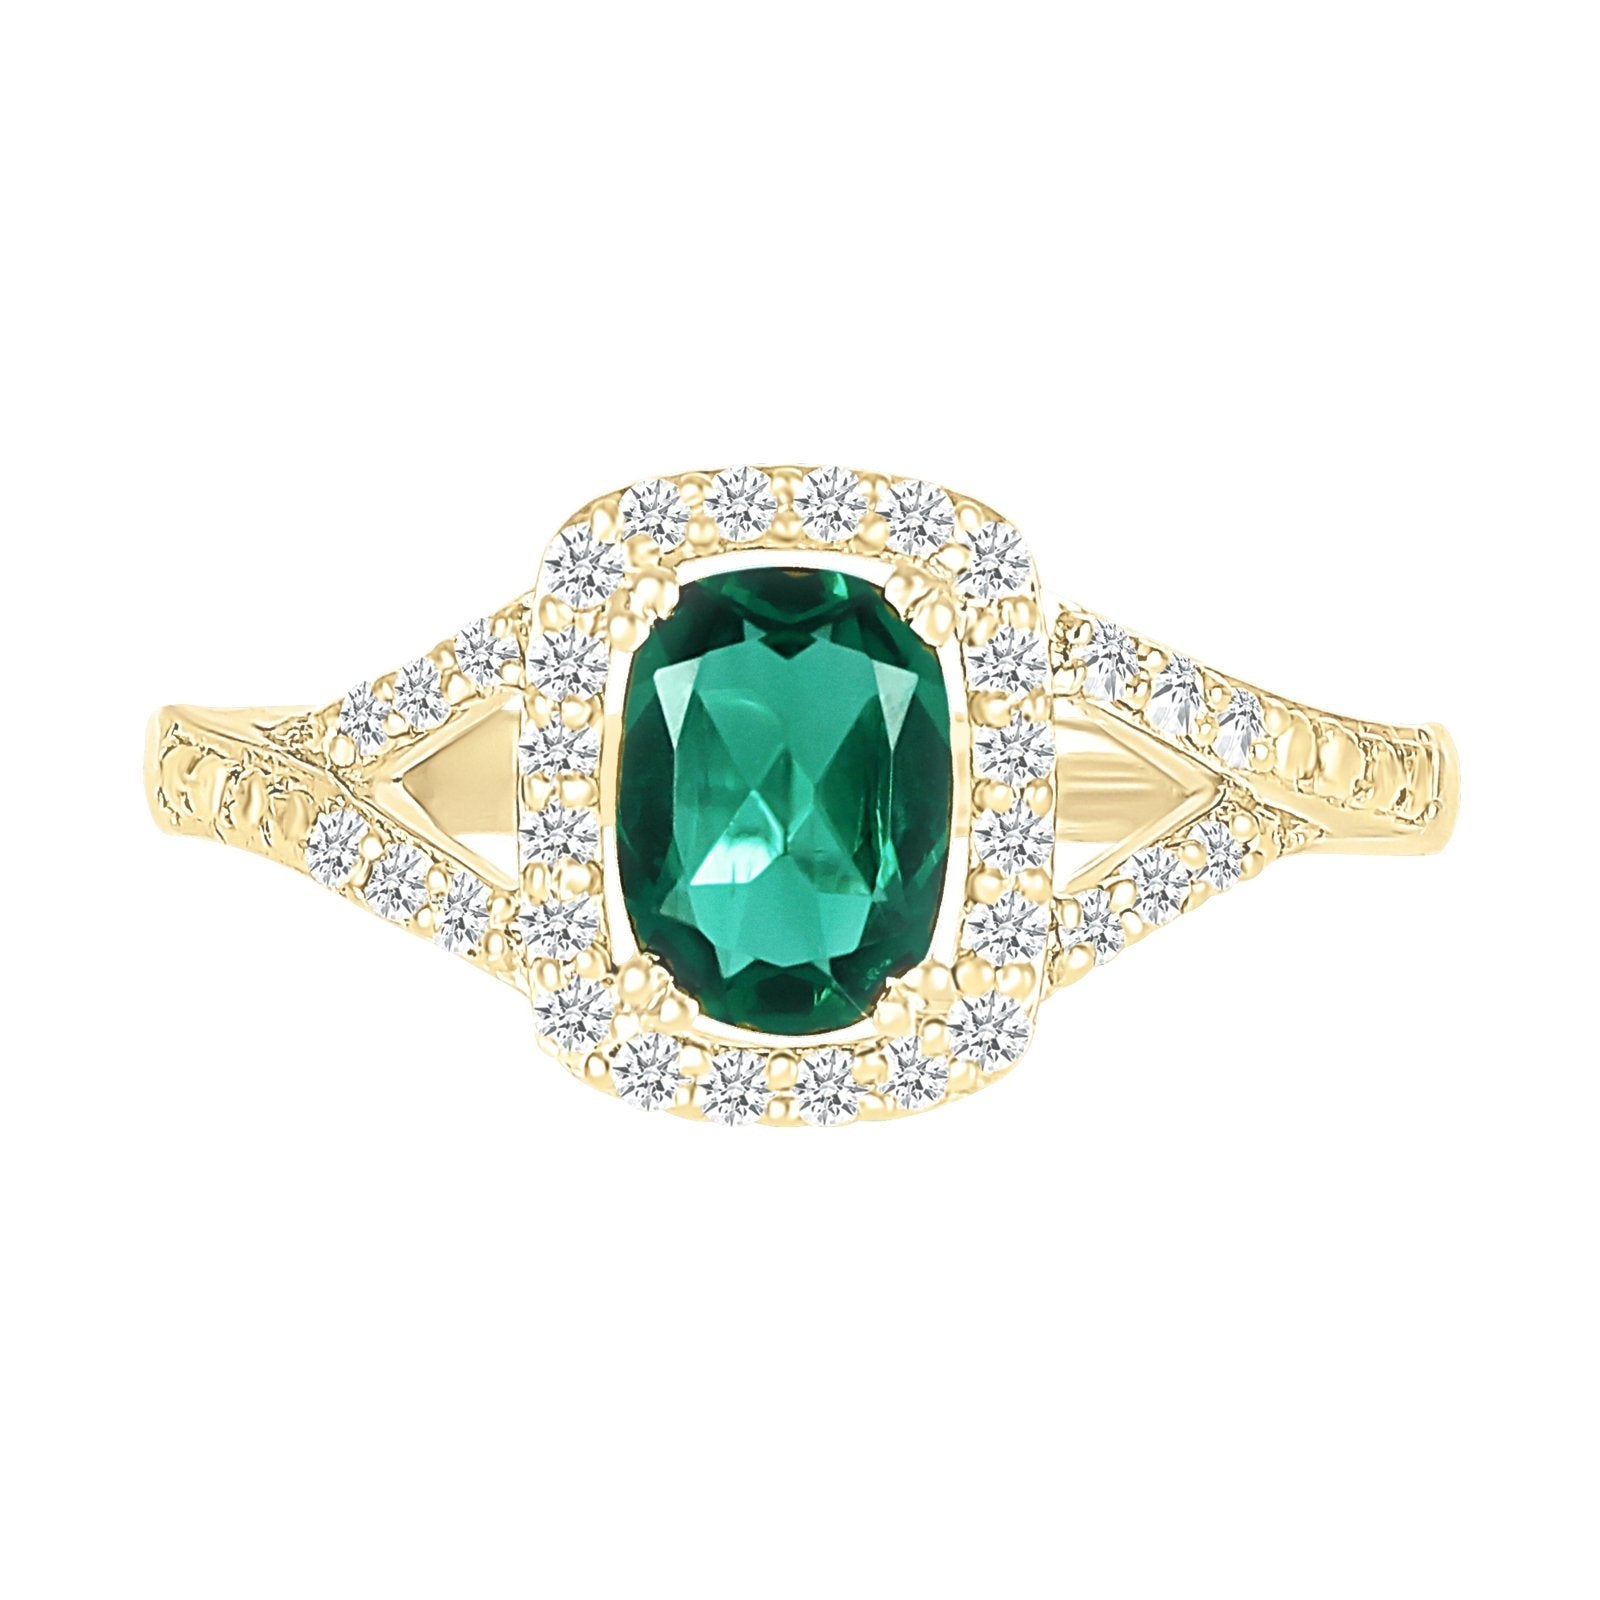 Cushion Cut Emerald Ring with White Sapphire Halo and Split Shank Rings Estella Collection #product_description# 32752 10k Birthstone Birthstone Jewelry #tag4# #tag5# #tag6# #tag7# #tag8# #tag9# #tag10#